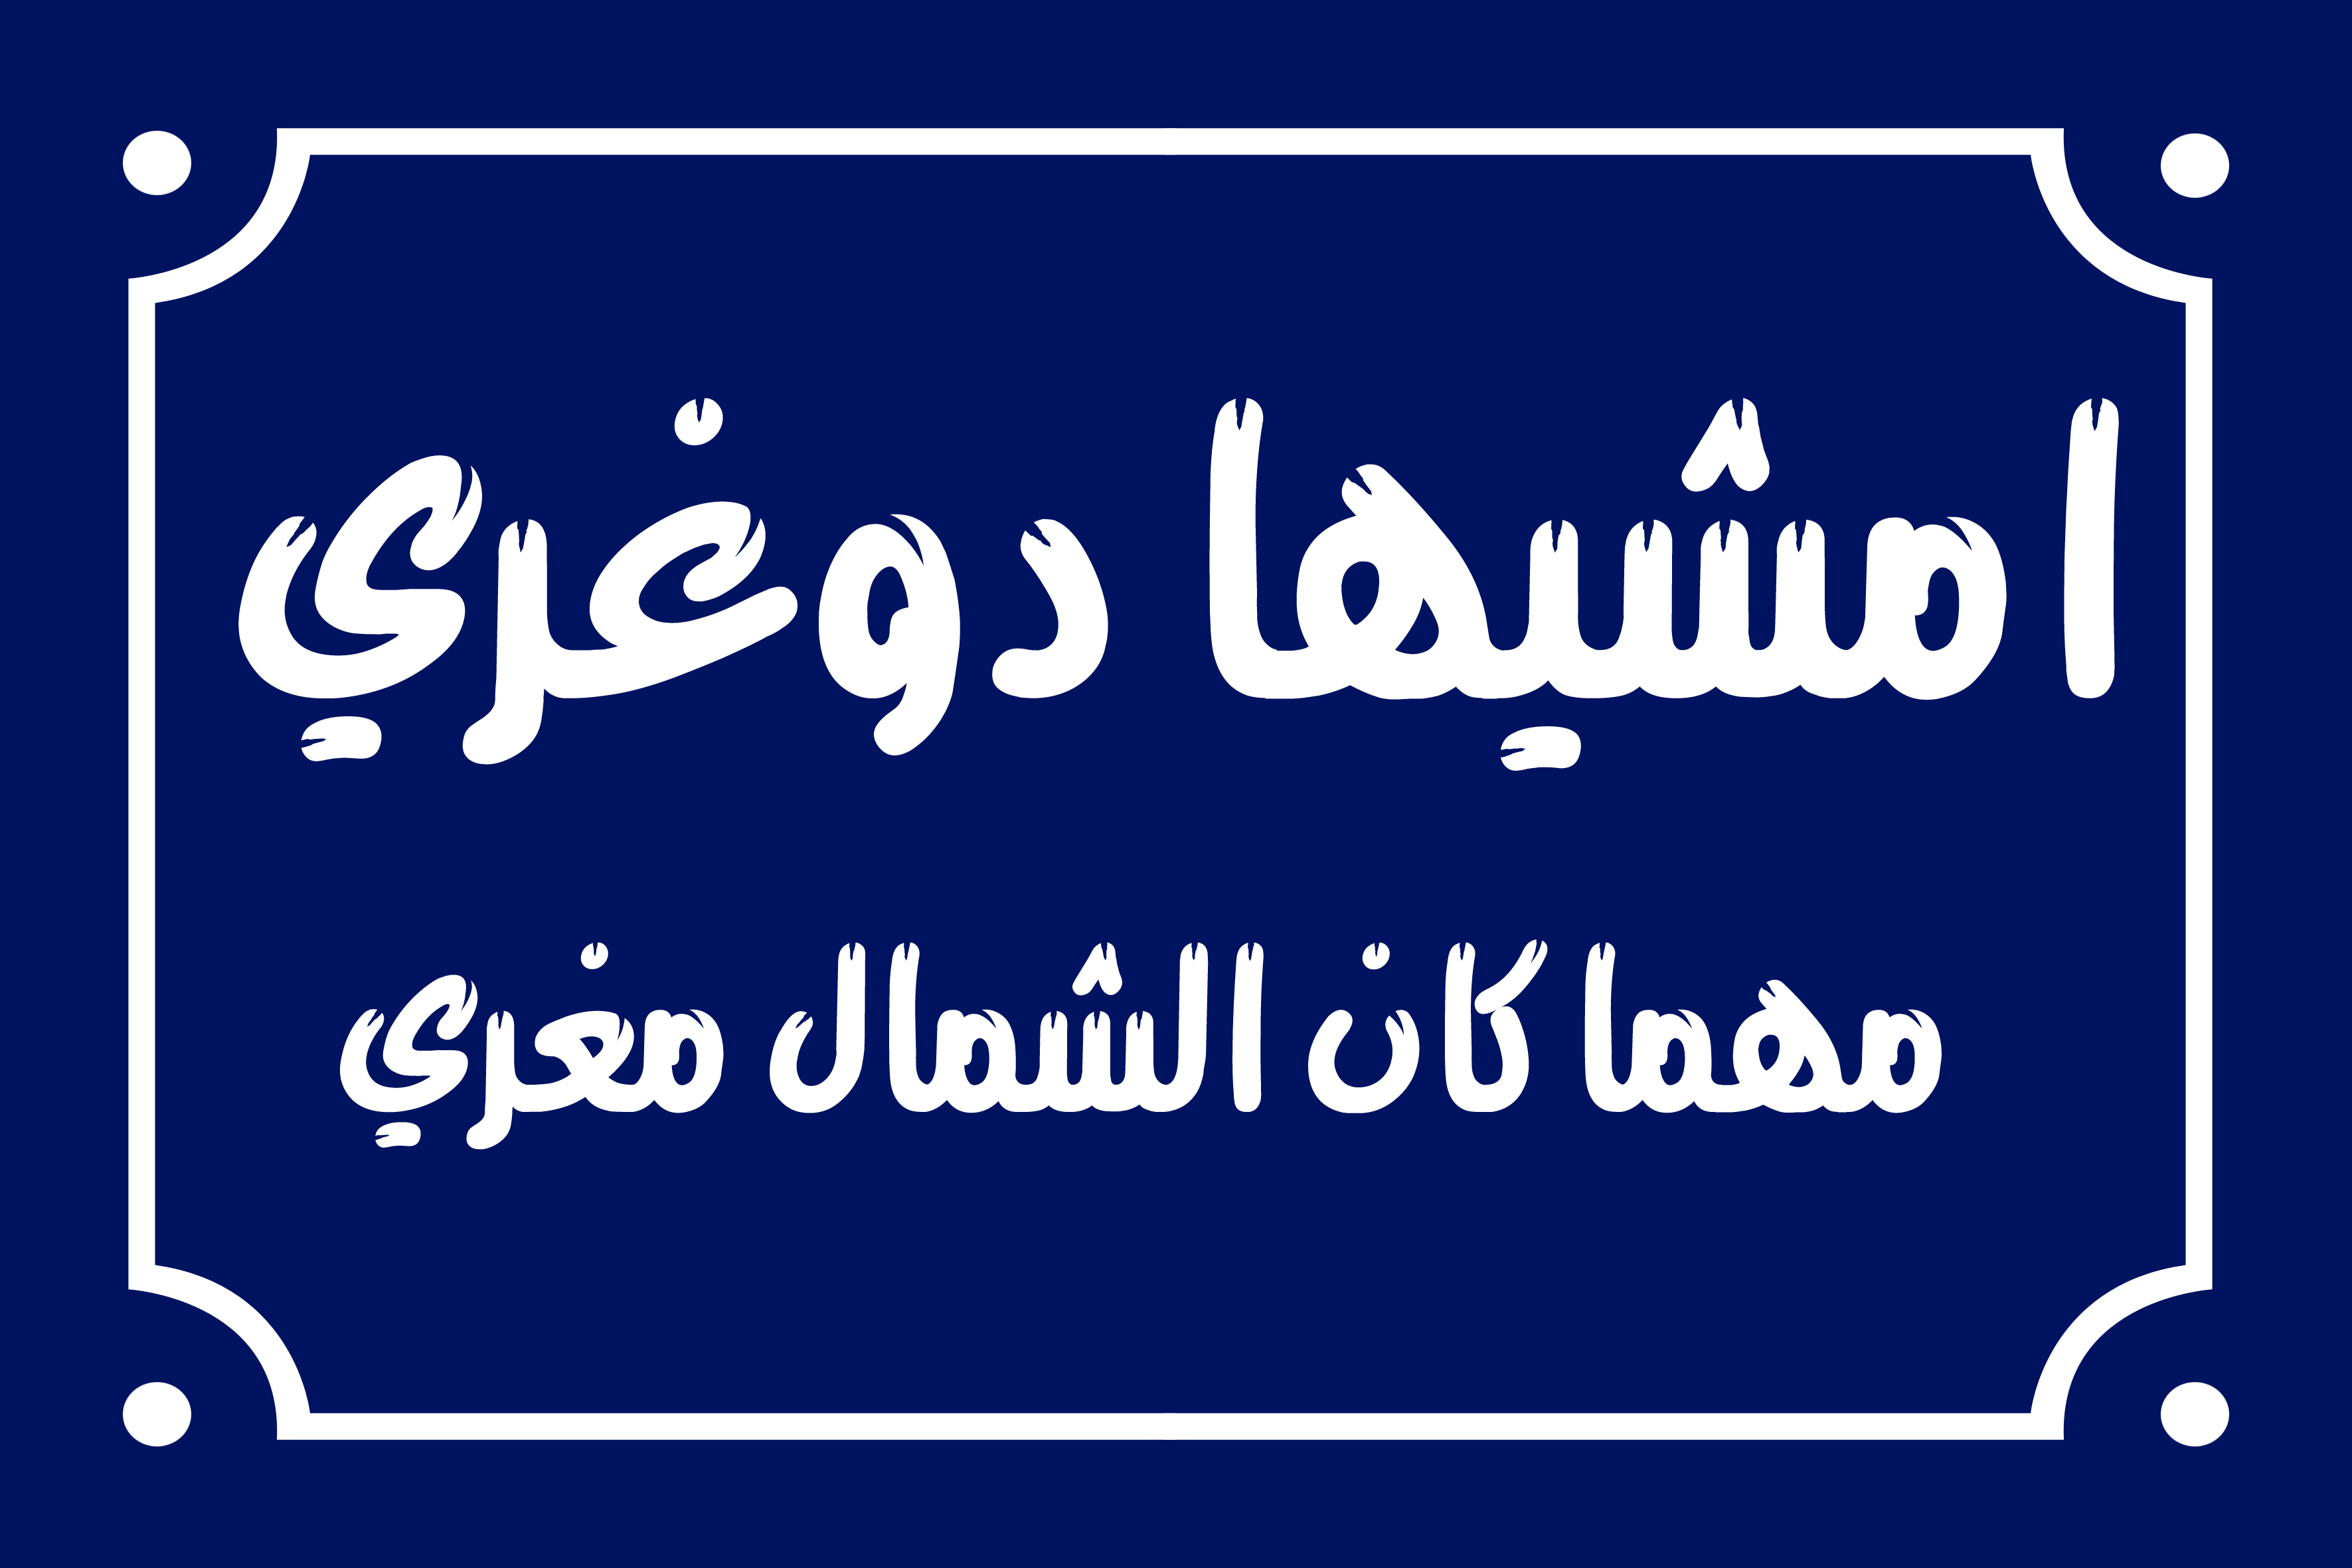 Home decor sign with arabic phrases 20 x 30 cm - Blue White